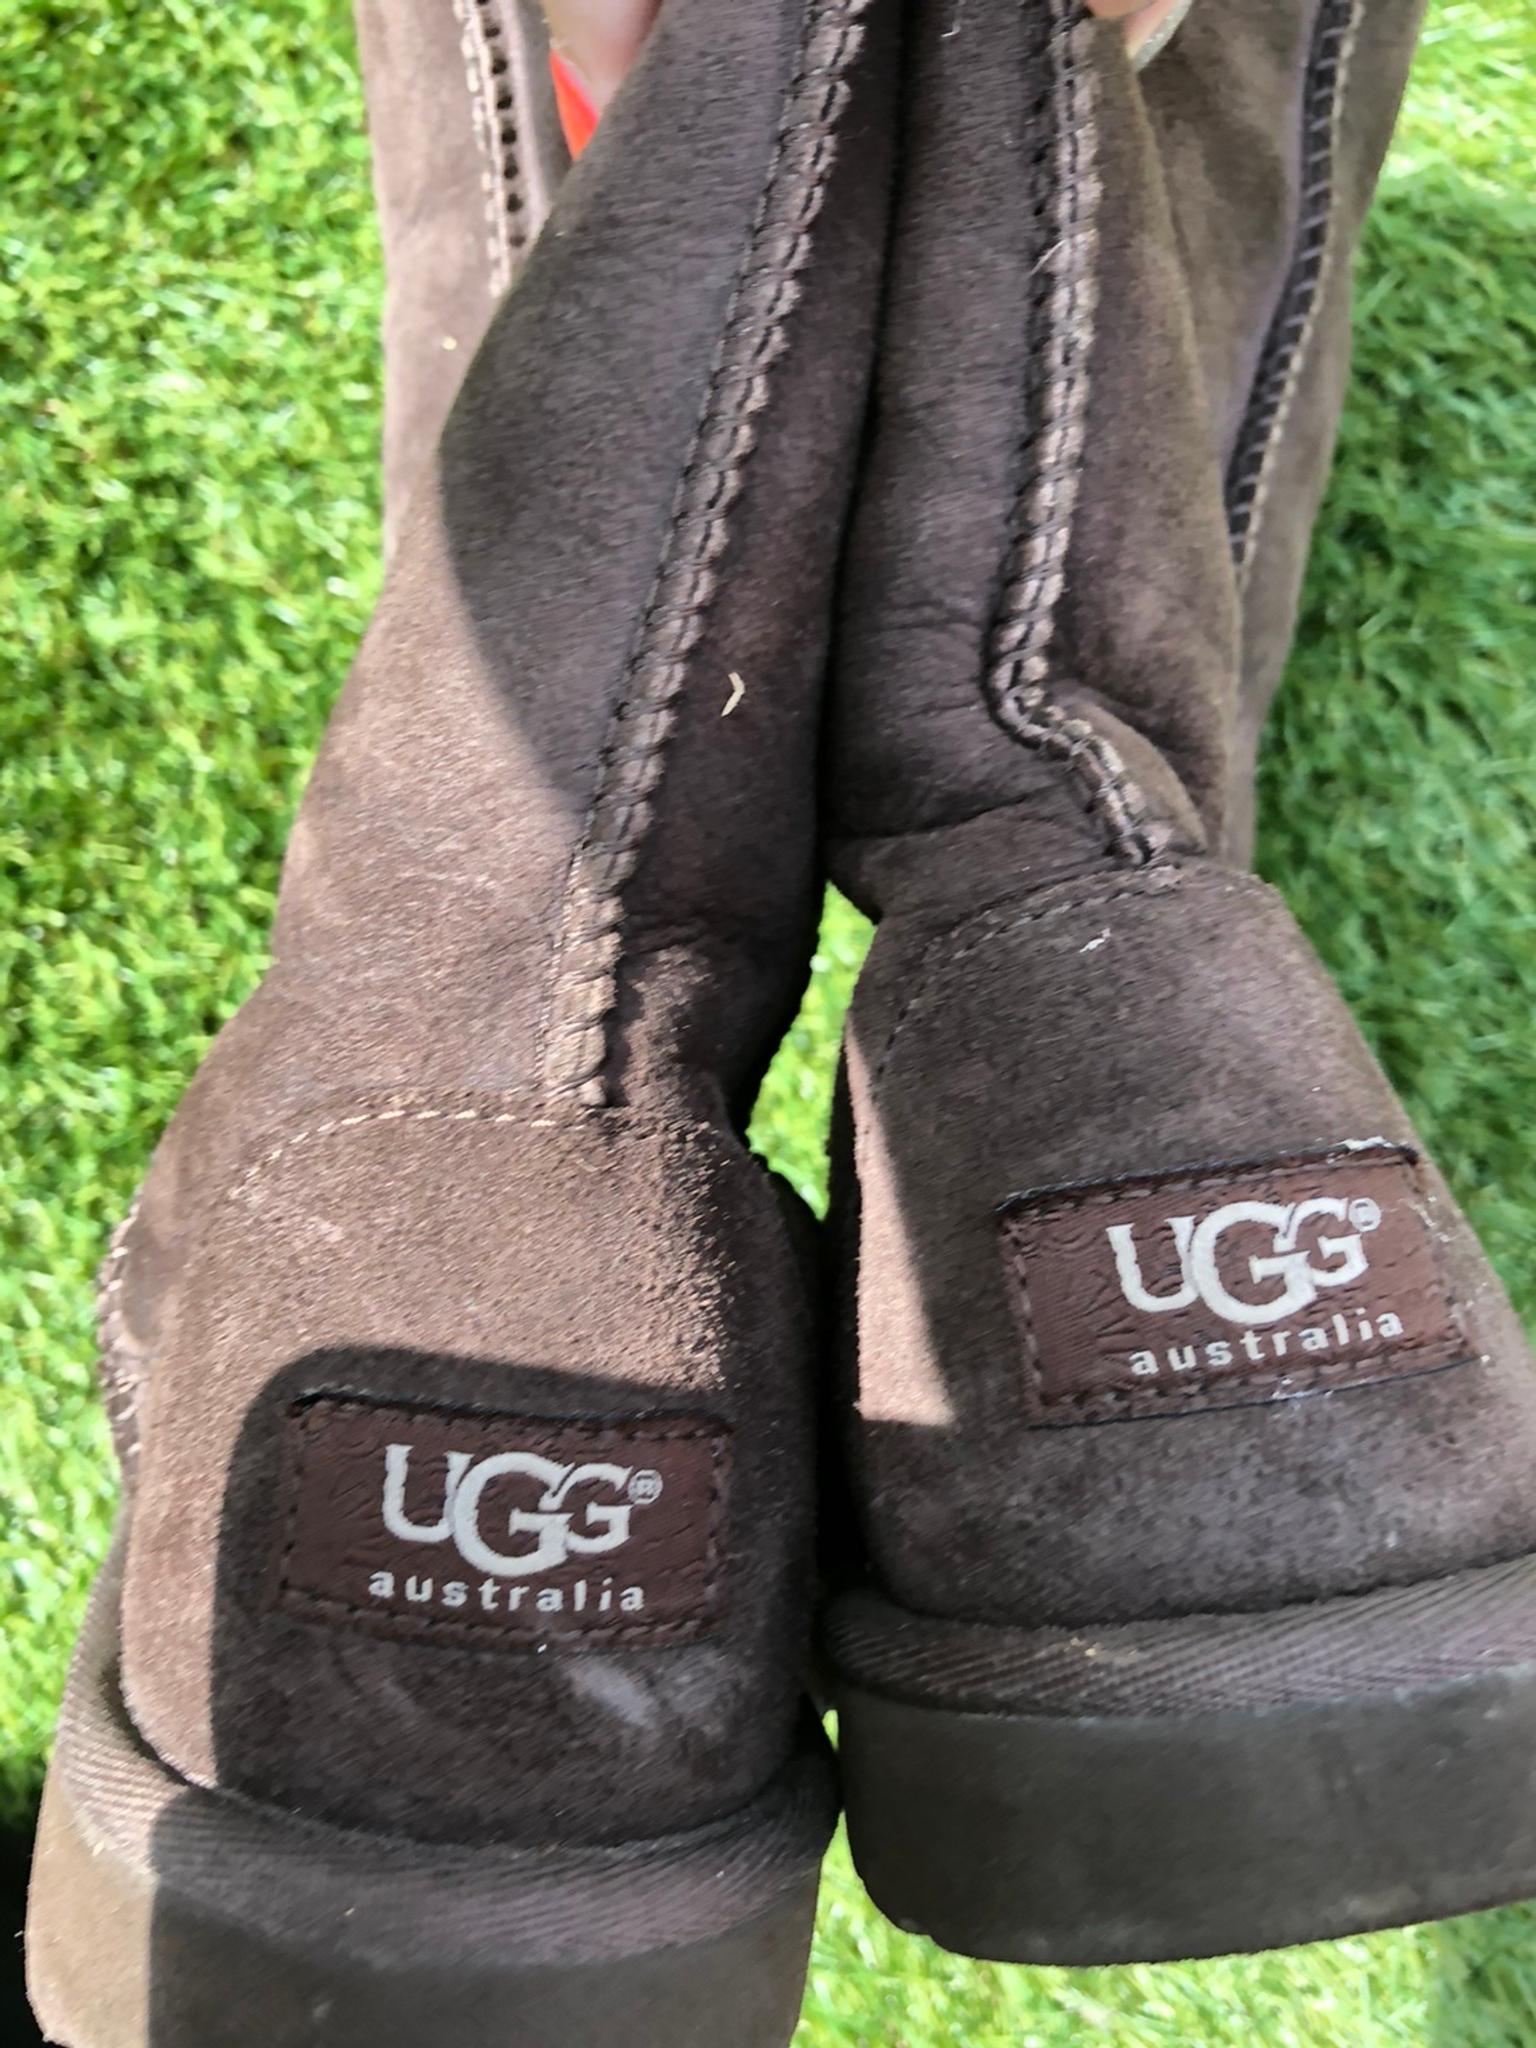 ugg cheshire oaks phone number